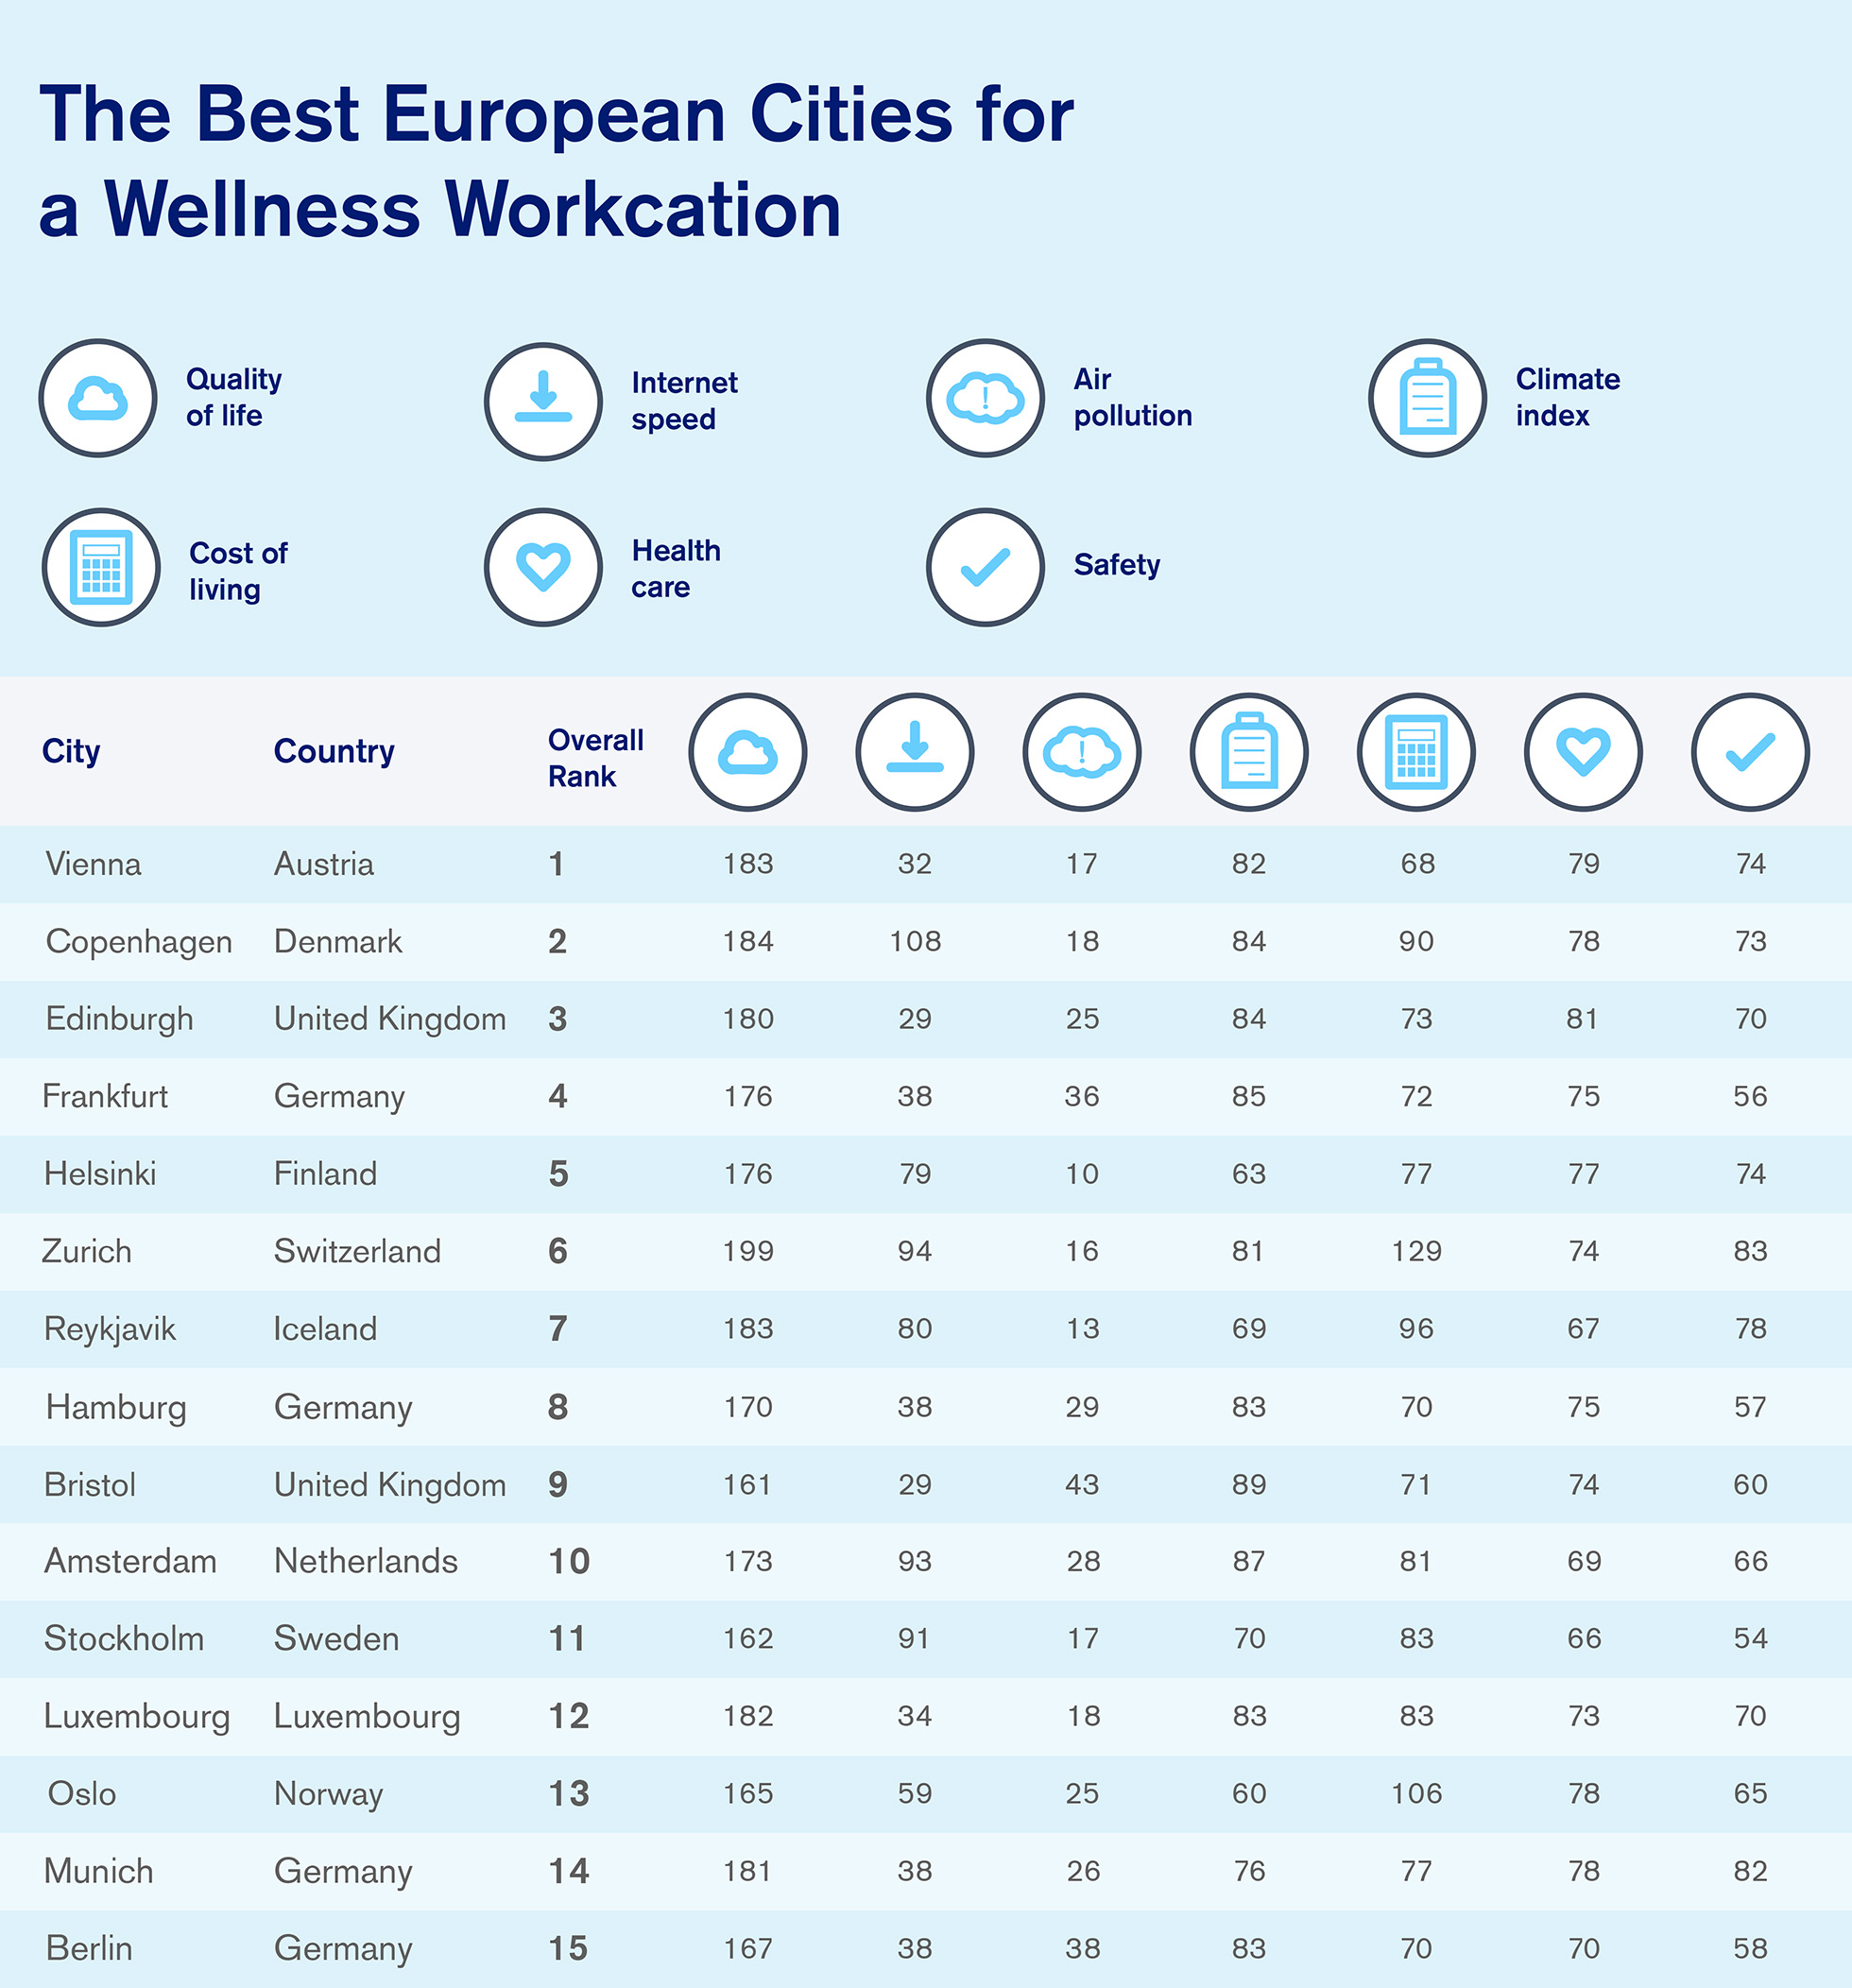 Ranking chart of the best European cities for a wellness workcation